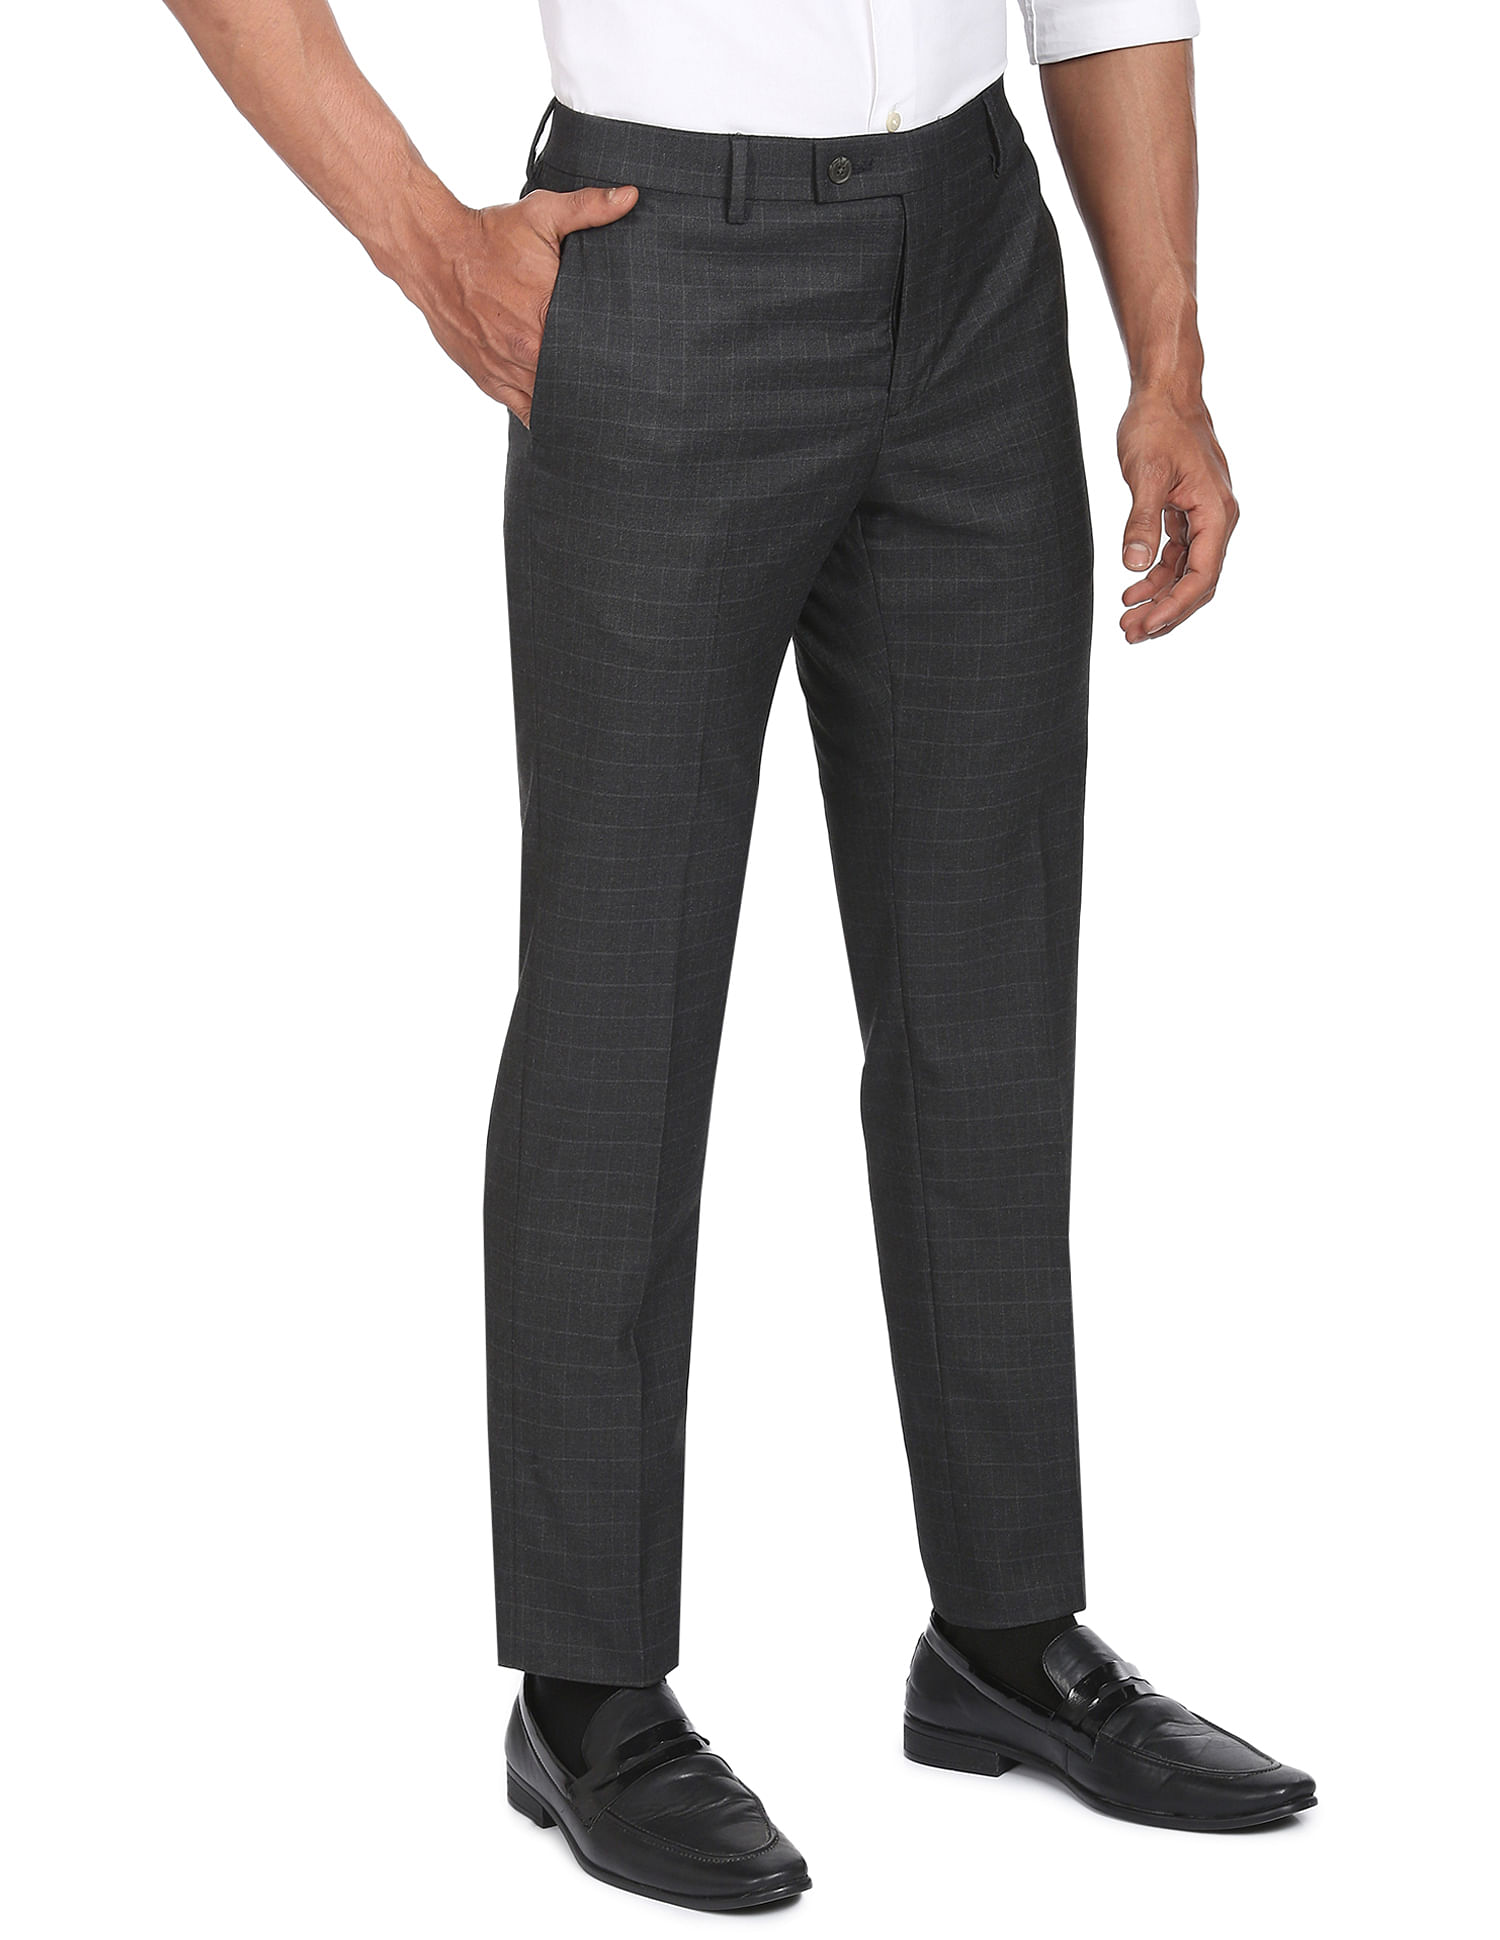 Buy Grey Trousers  Pants for Men by The Indian Garage Co Online  Ajiocom